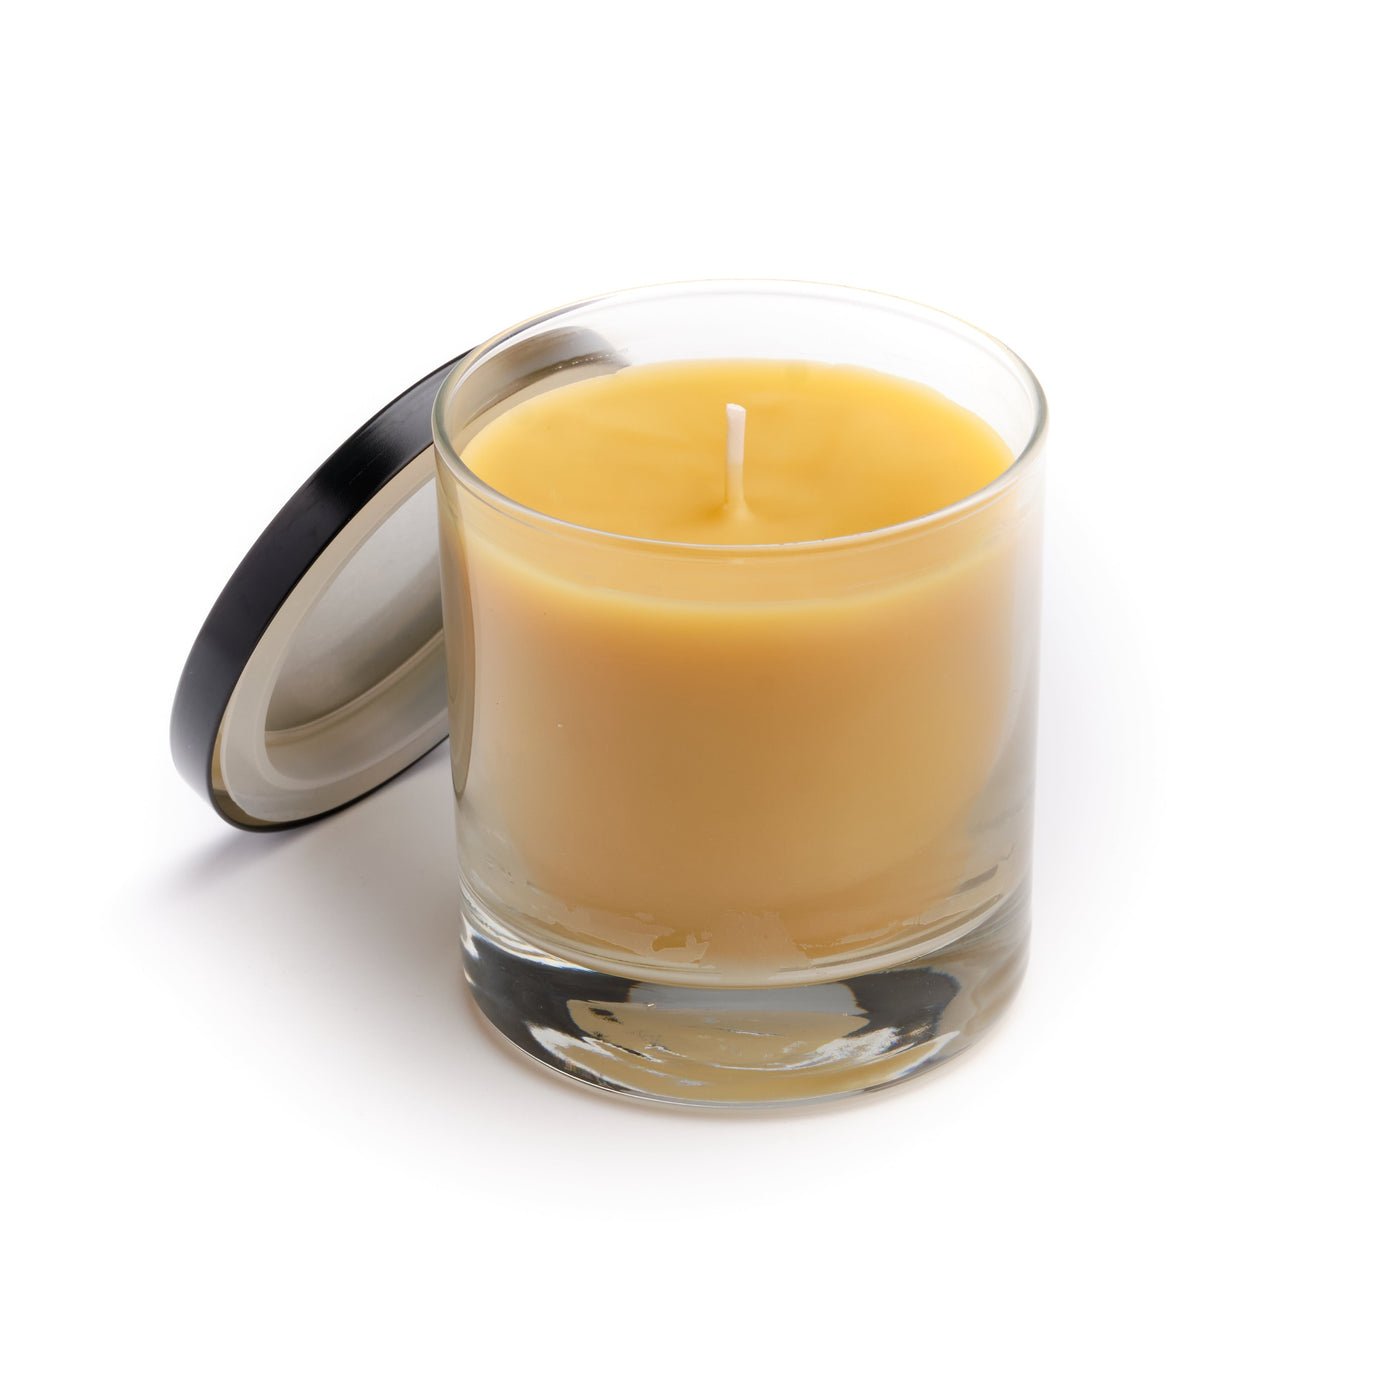 Beeswax & Soy Candles by Heliotrope San Francisco